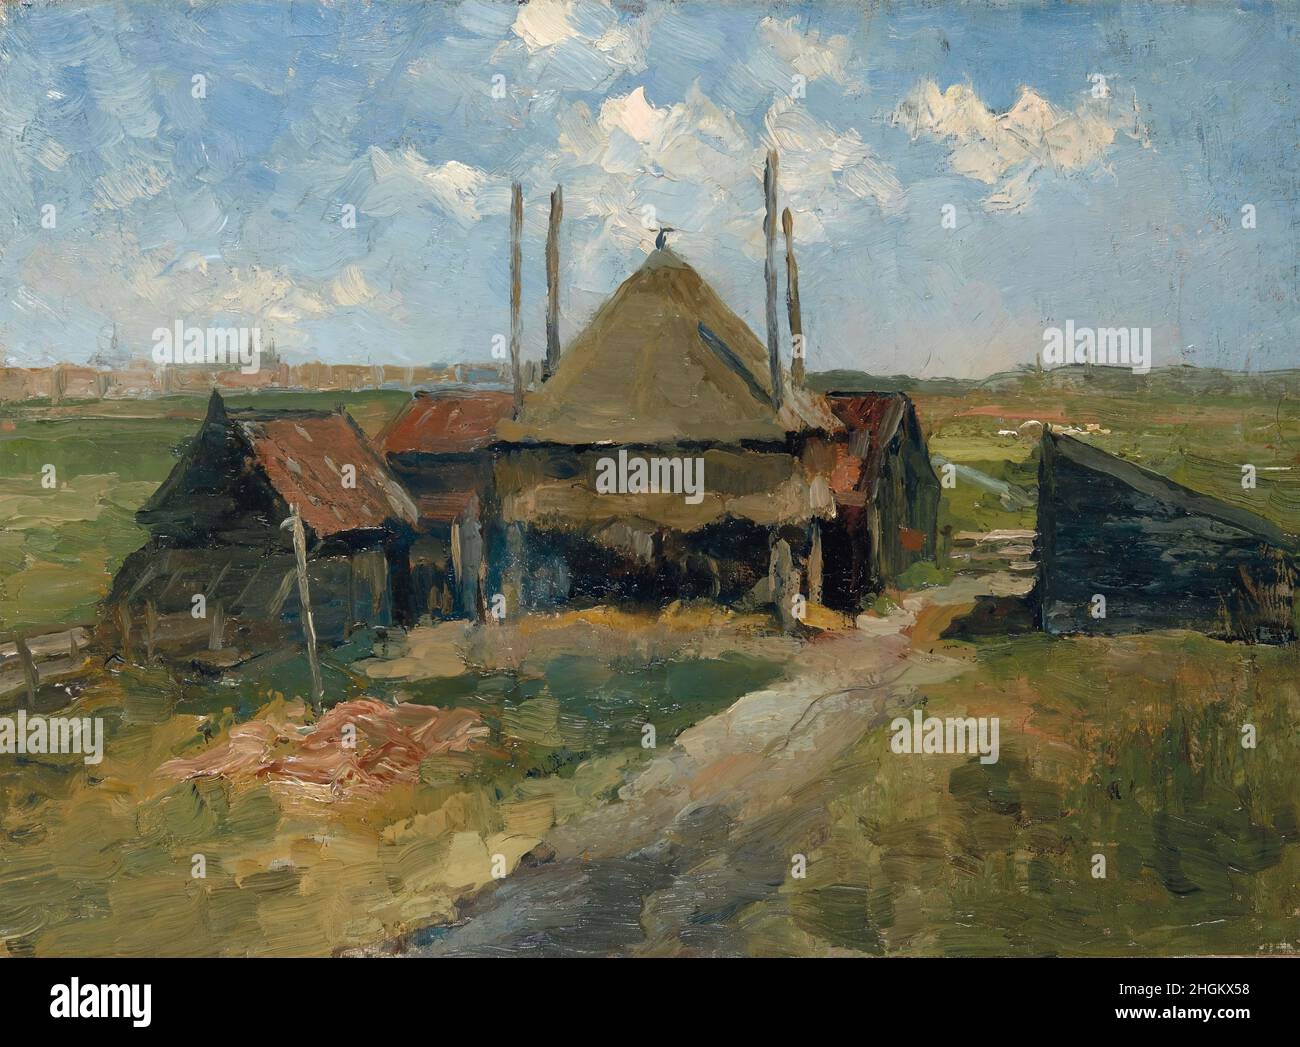 Mondrian Piet - Collection privée - Haystack and Farm Sheets in a Field - 1897 98 - huile sur toile 37 x 52,5 cm Banque D'Images